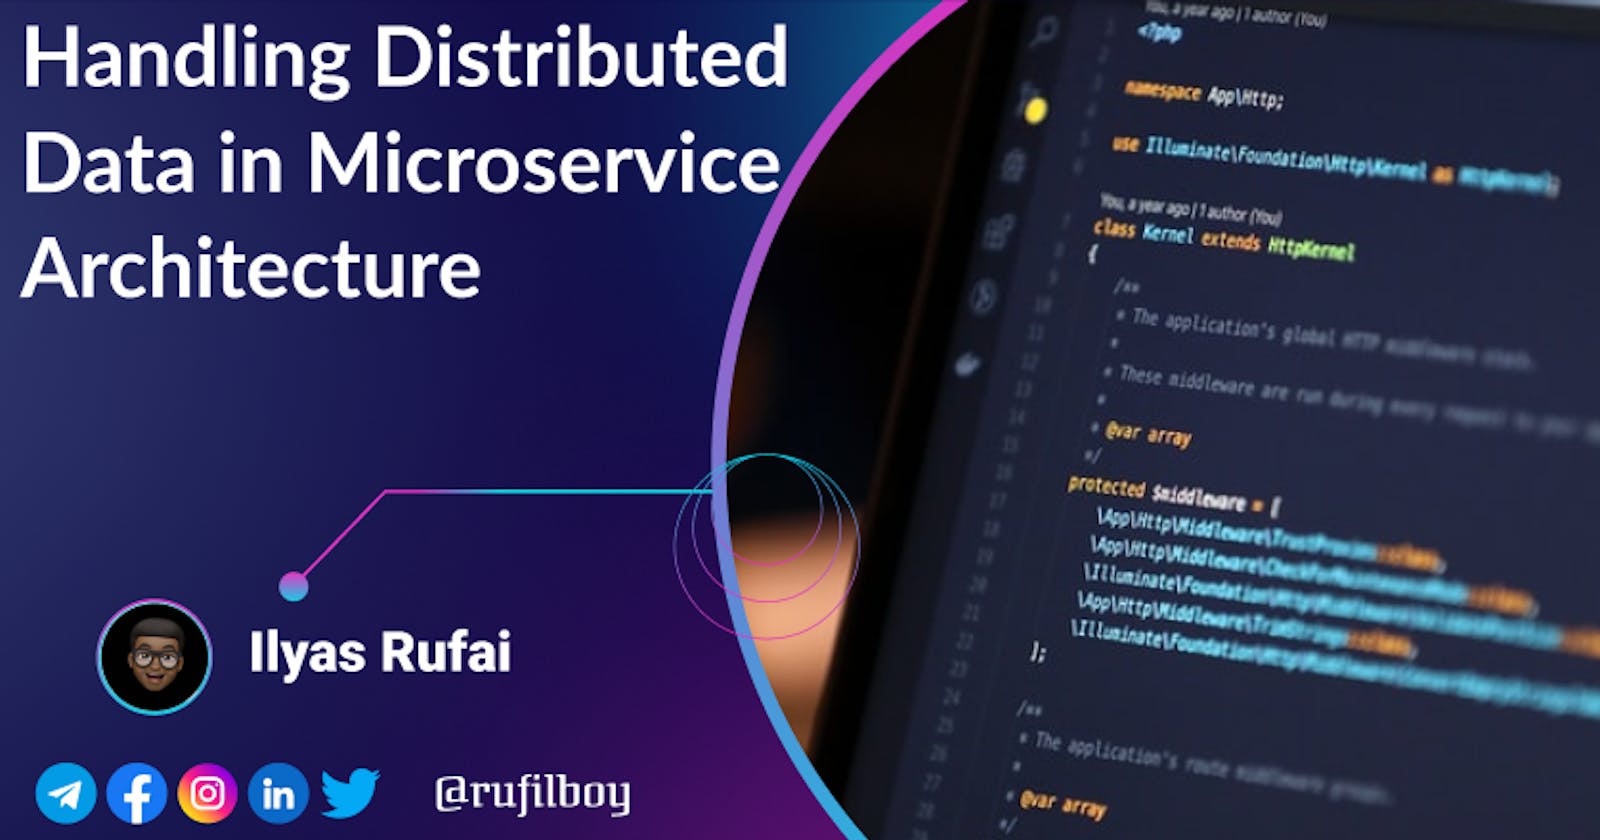 Day 97 -Handling Distributed Data in Microservice Architecture